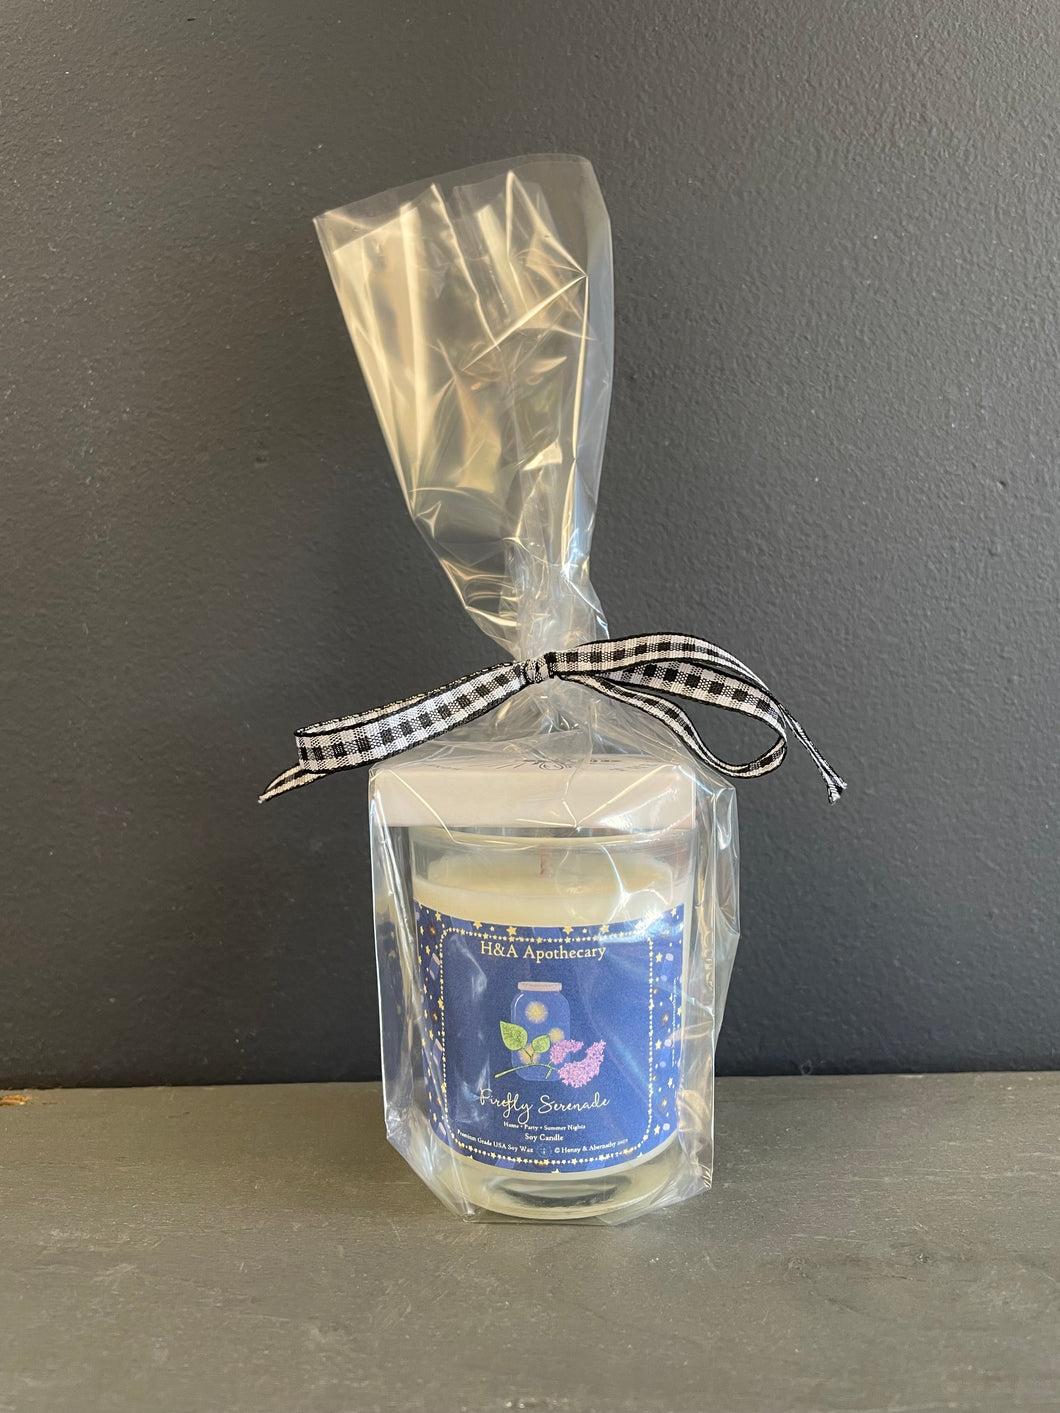 H&A Firefly Serenade Votive Candle Gift Set